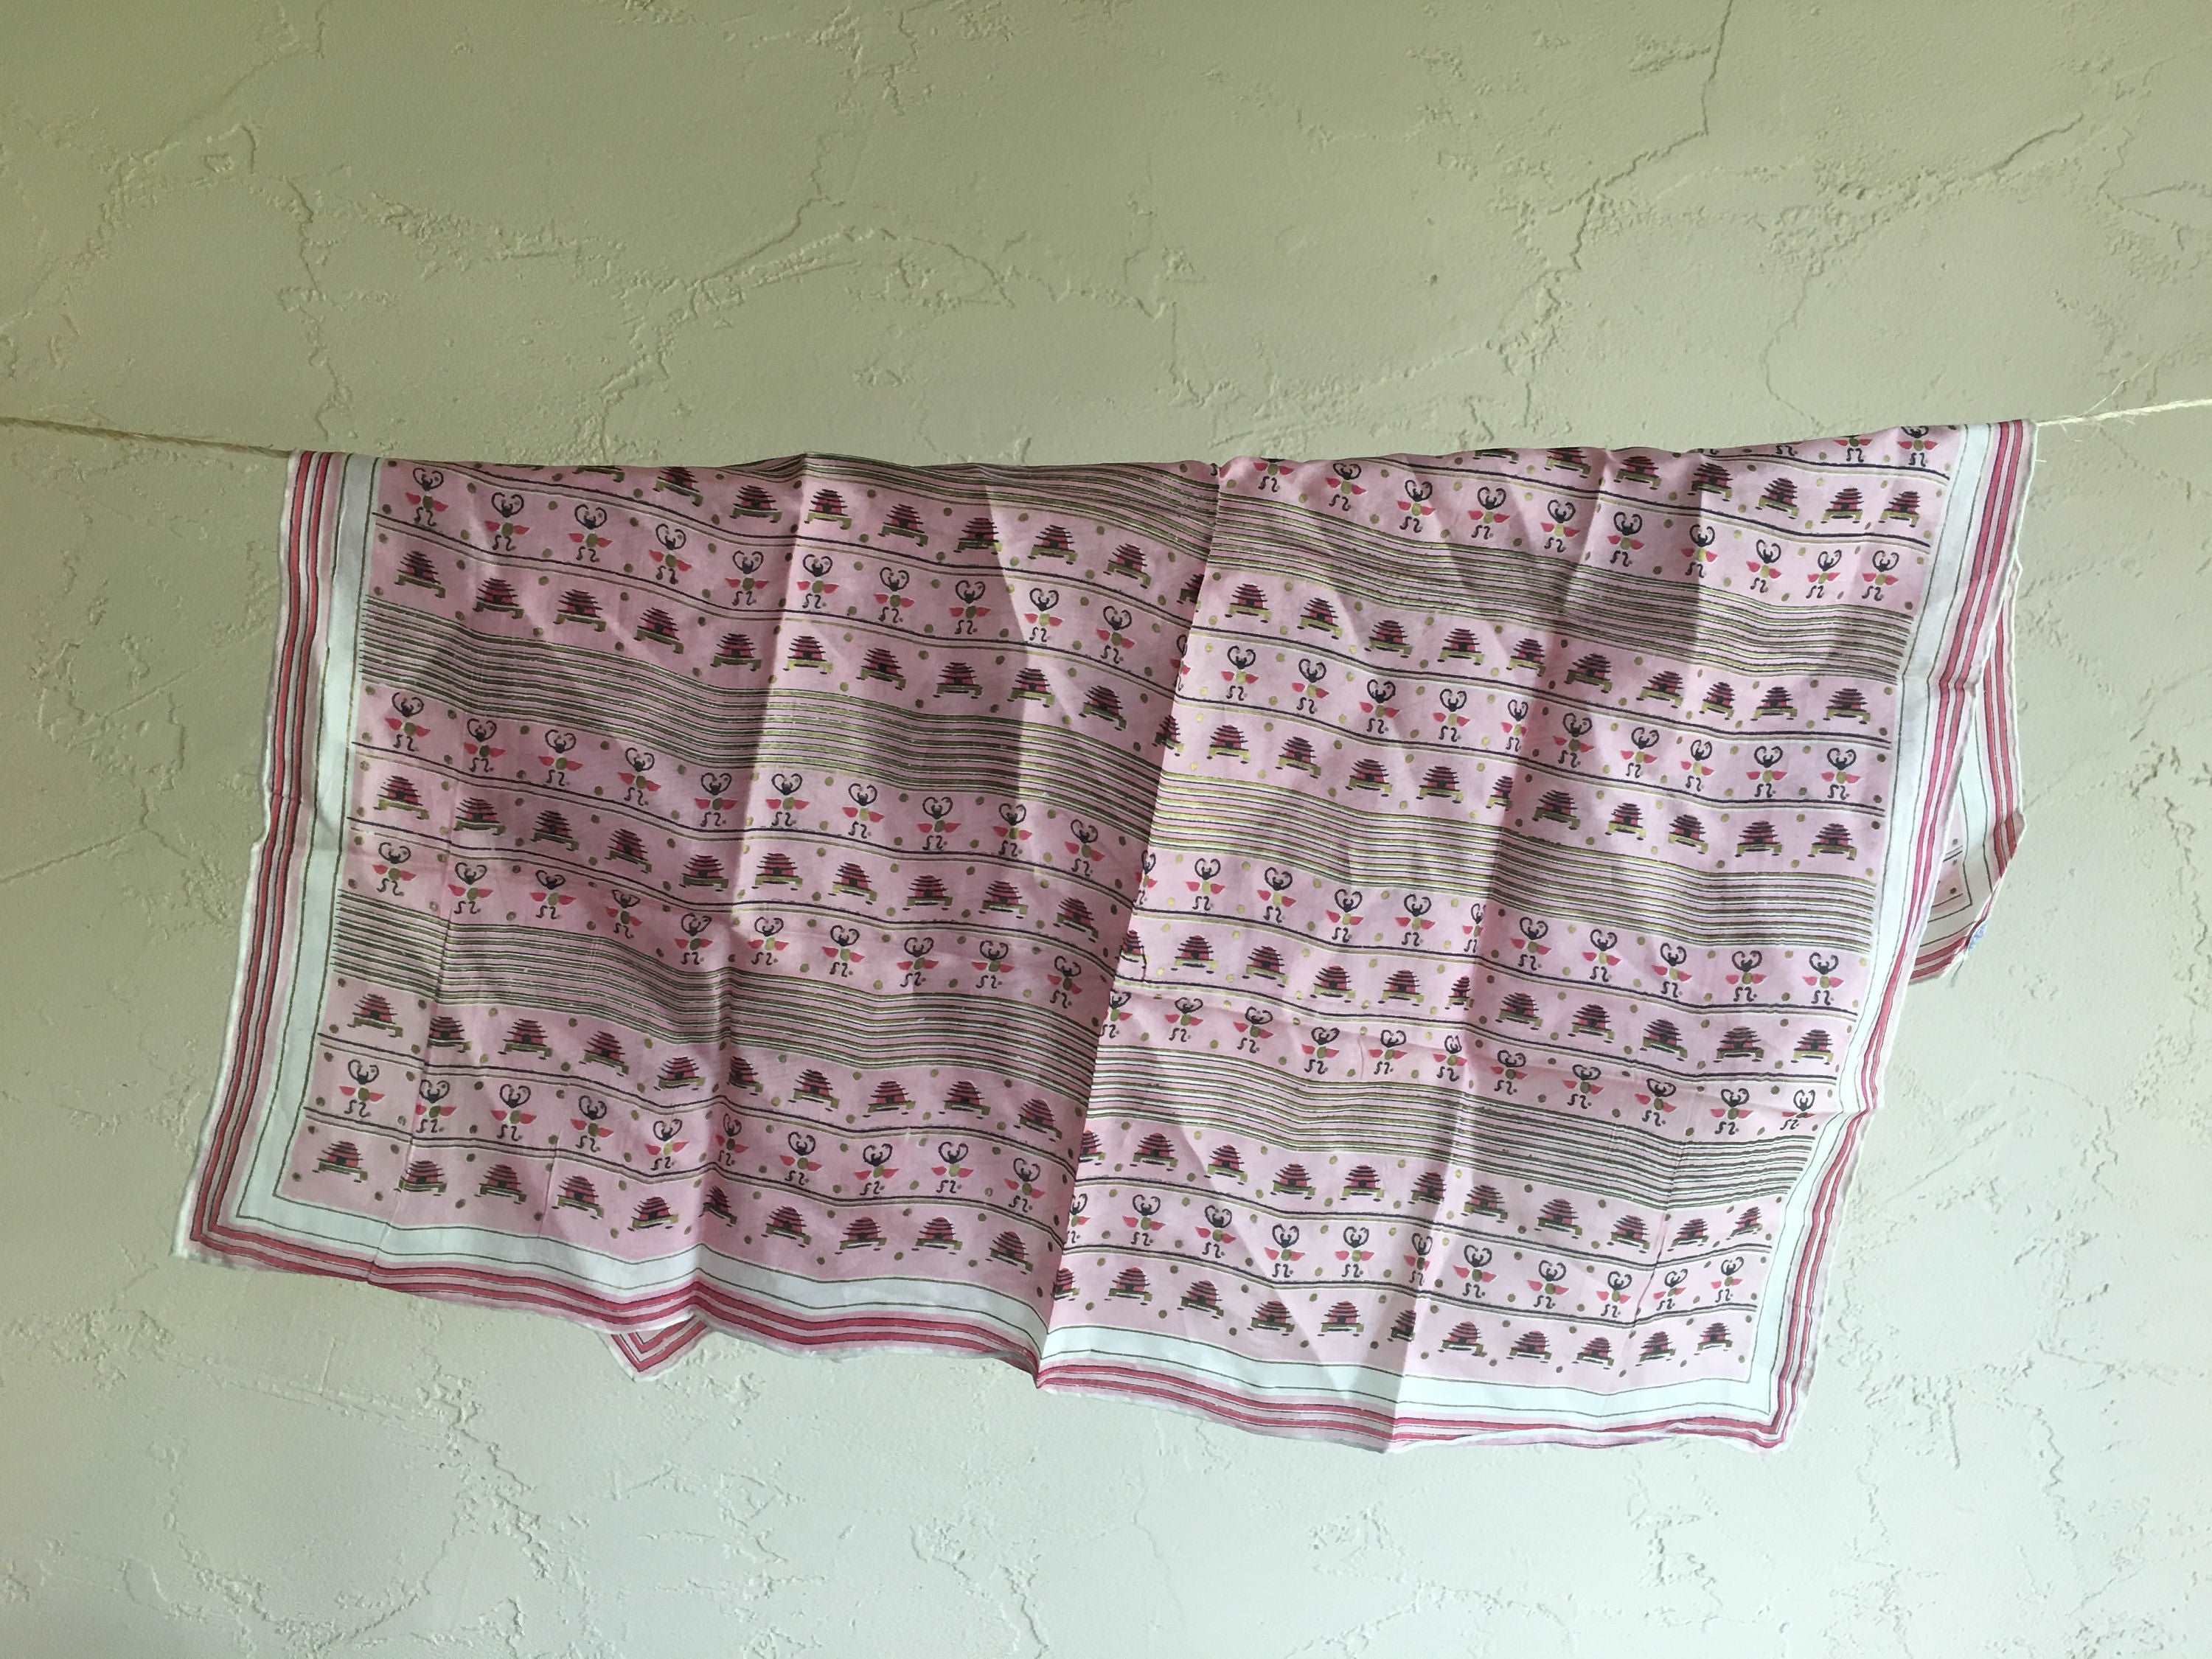 Beehive Themed Pink Silk Scarf - A Vintage Tribute to the Industrious Bee